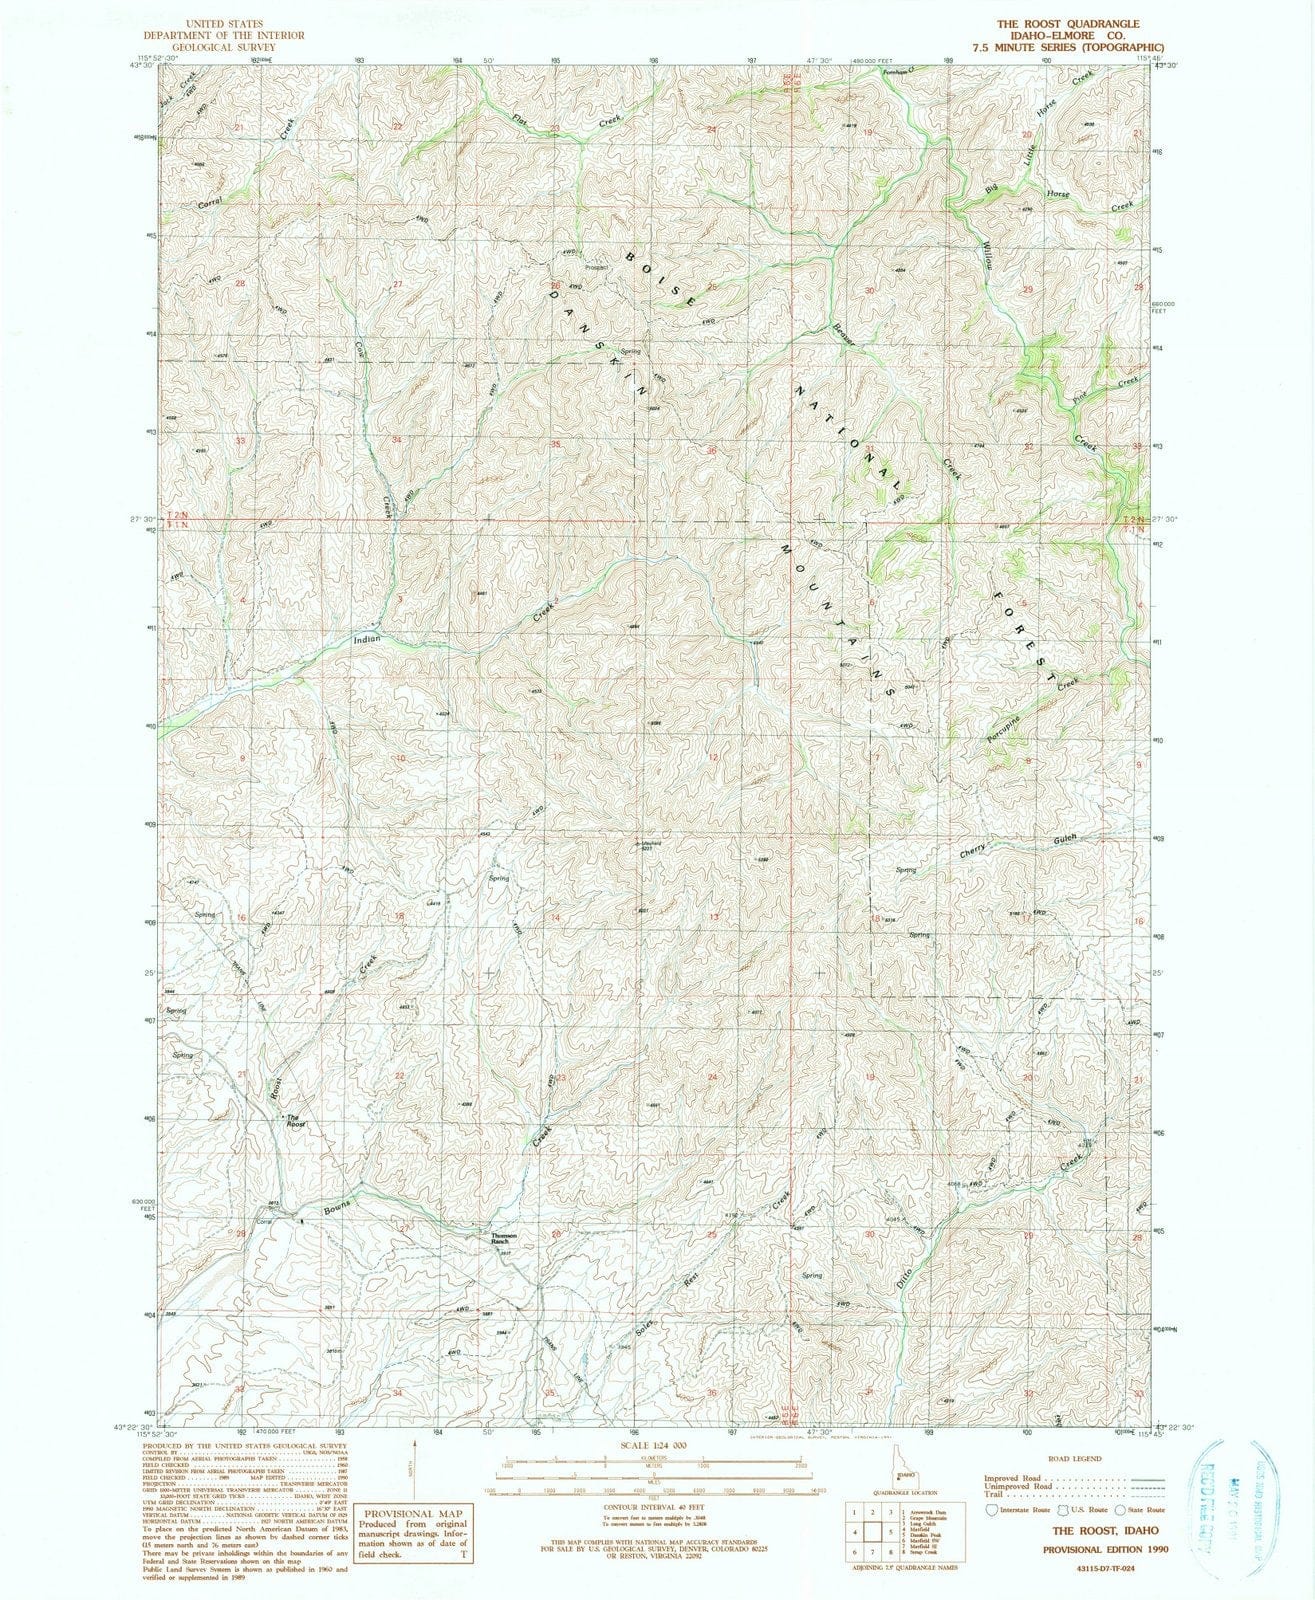 1990 The Roost, ID - Idaho - USGS Topographic Map